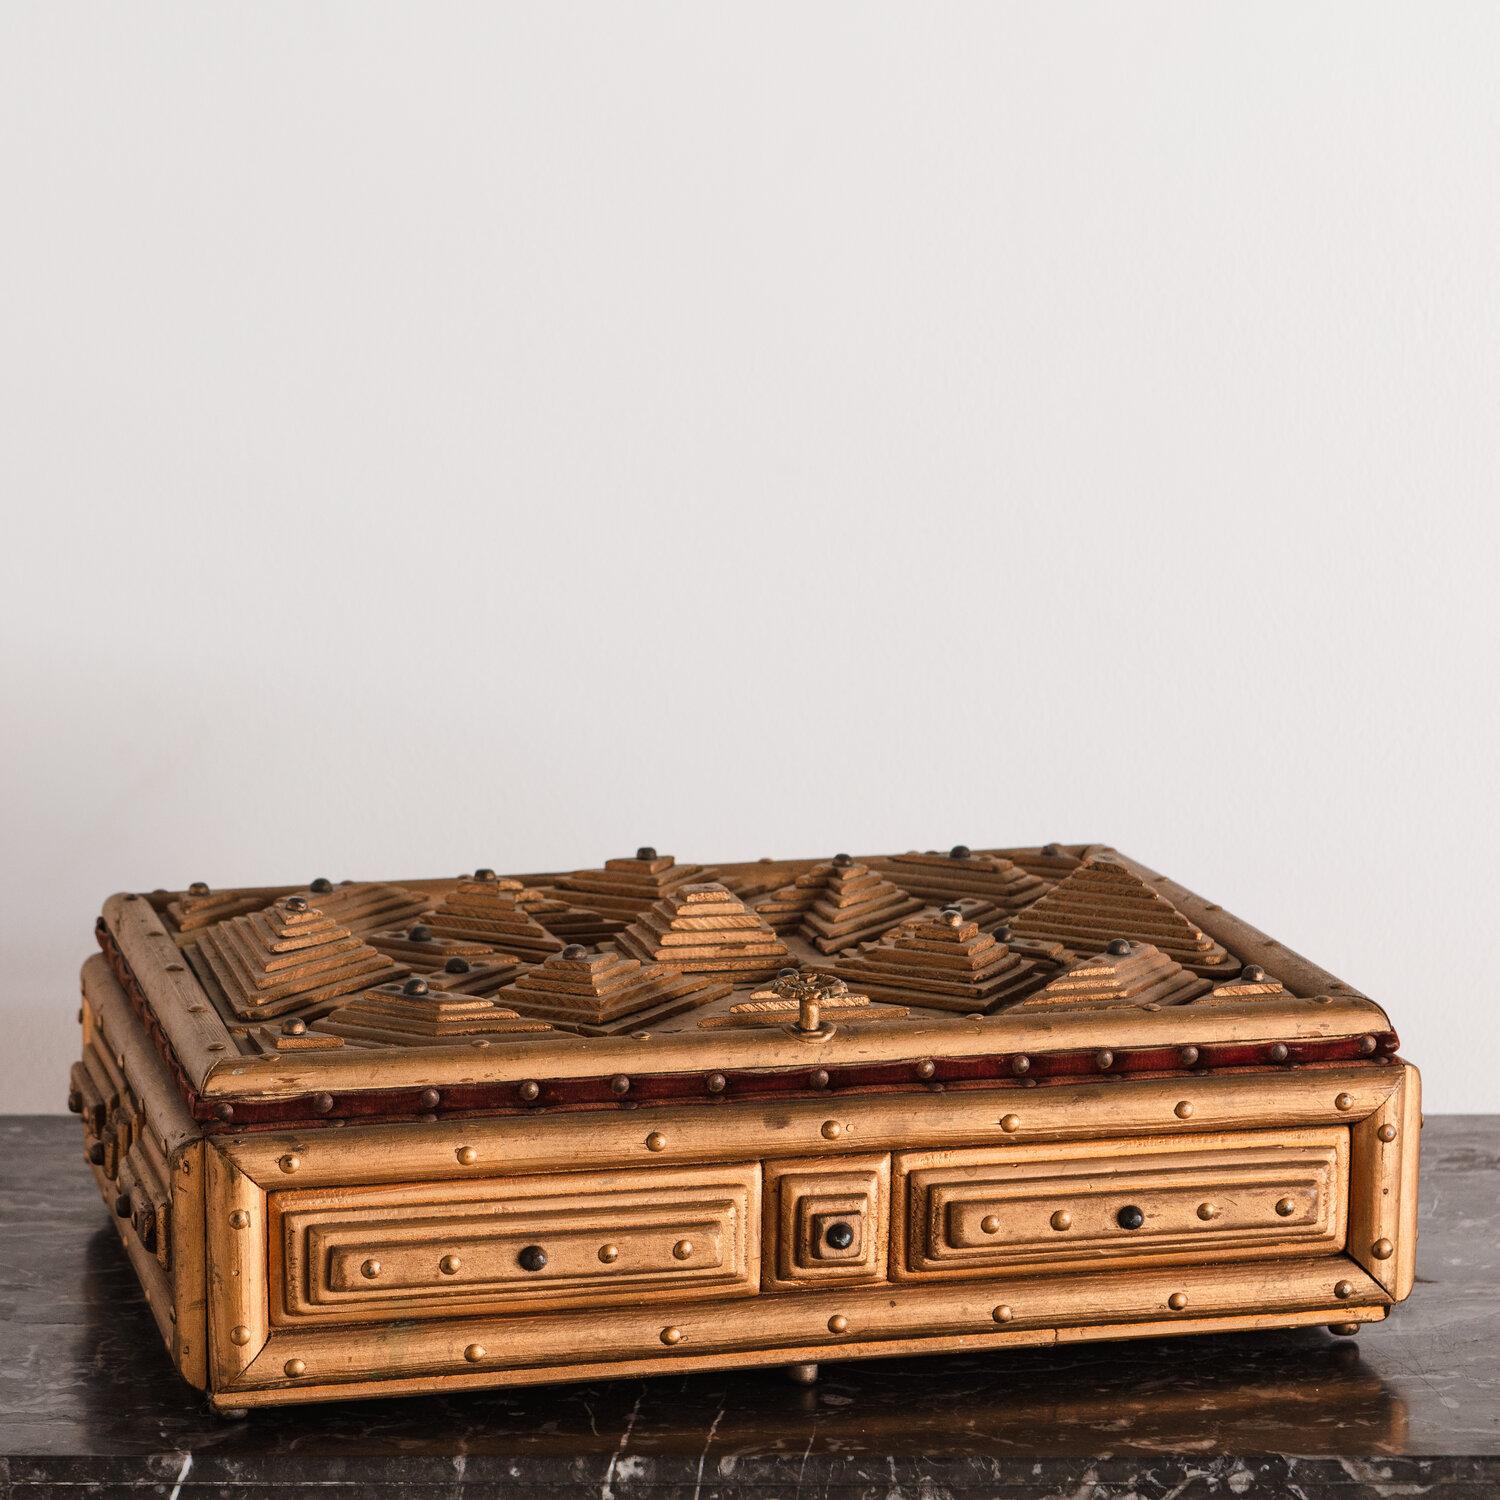 A stately vintage hand carved wood tramp lidded box, lined with red velvet. Tramp art refers a style of woodworking from the late 1800s known for its layers of geometric patterns.